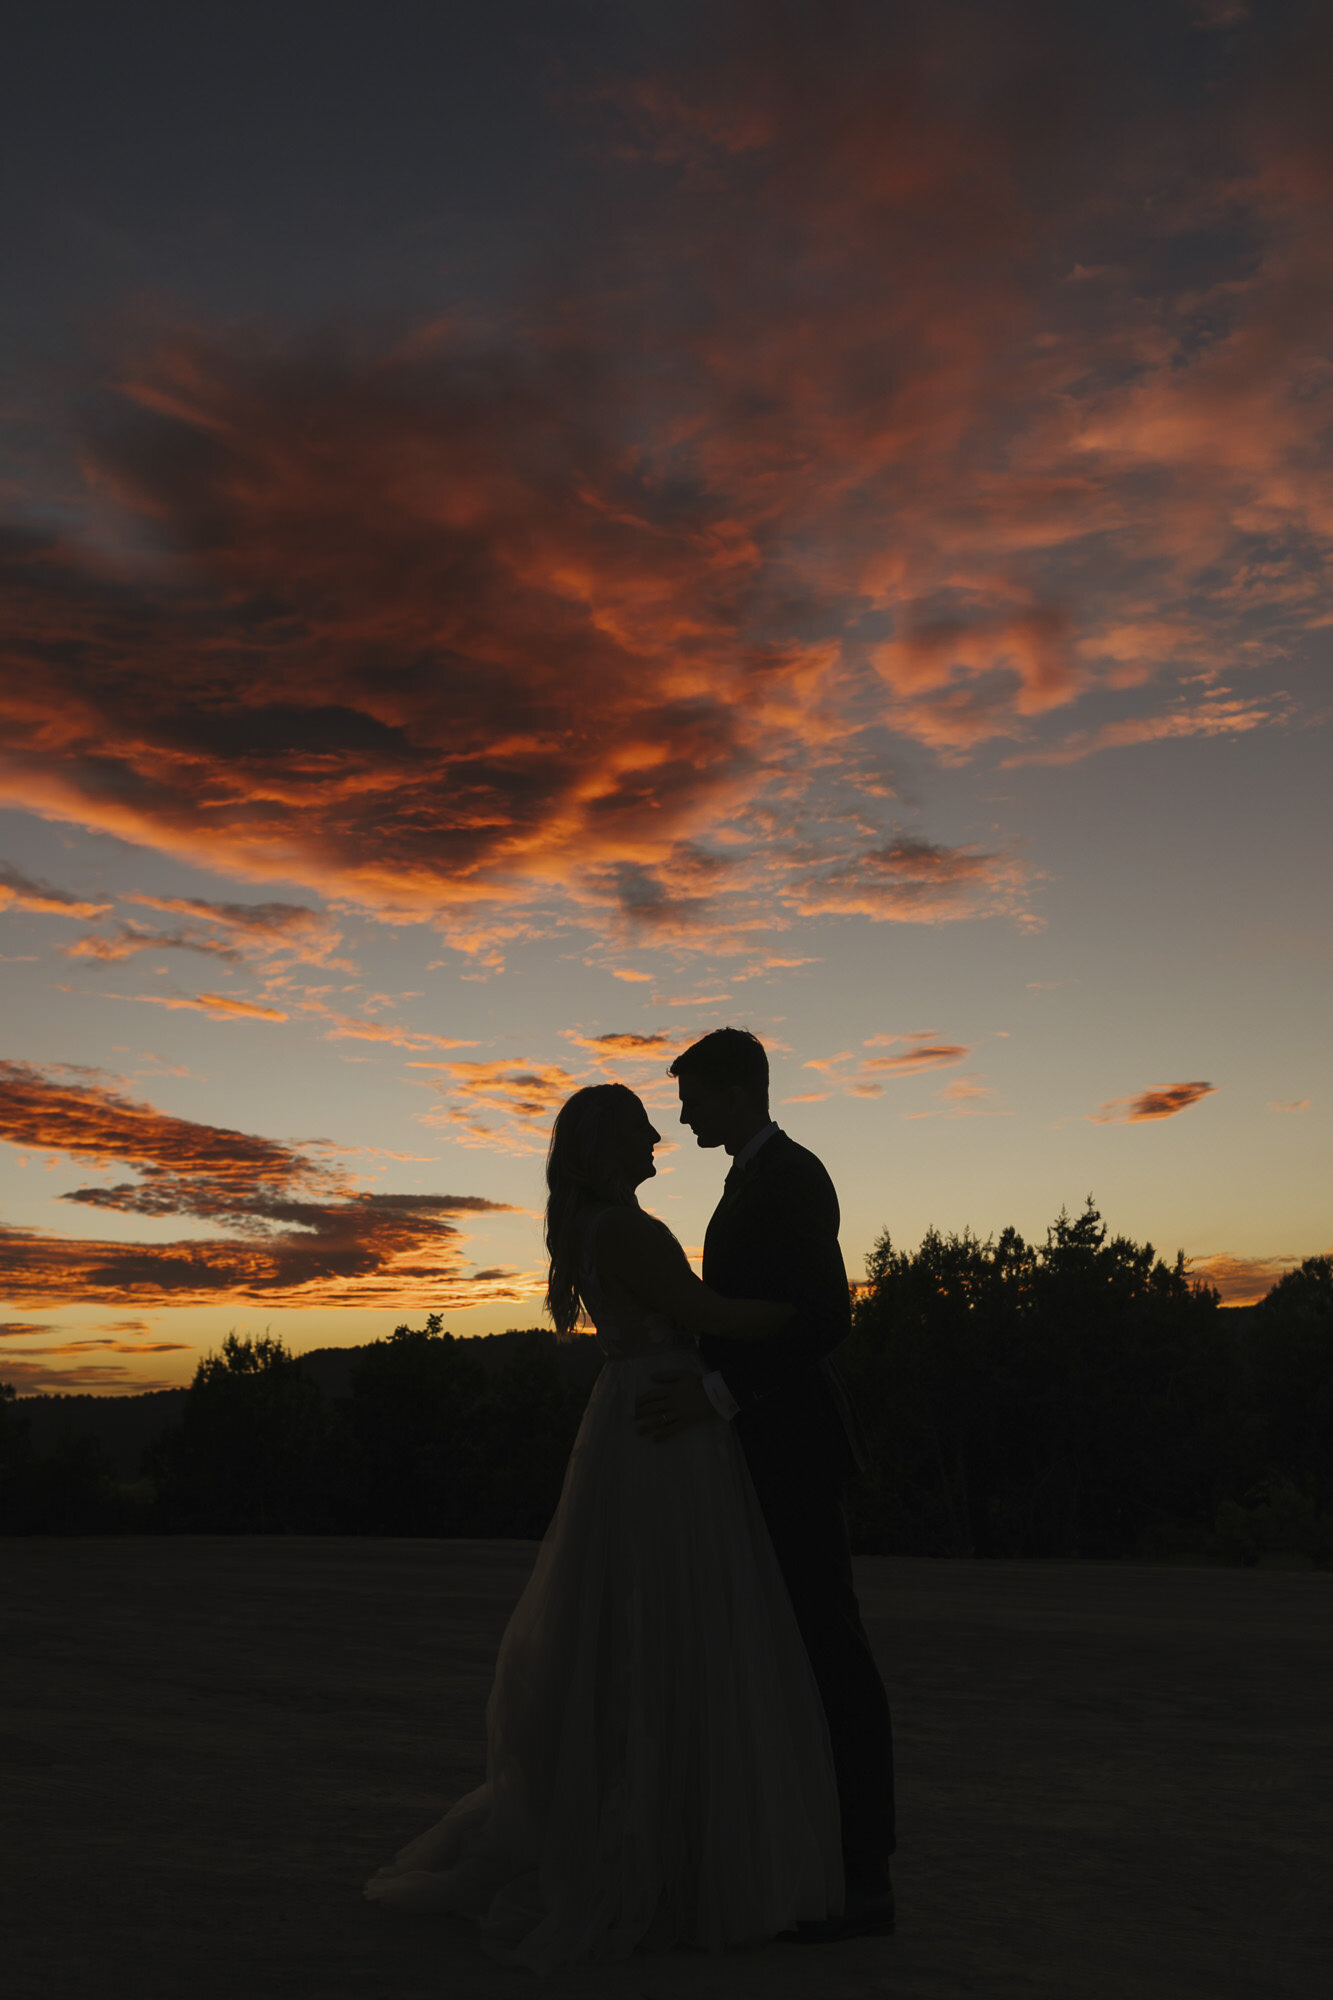 Wedding couple silhouetted against an amazing red sunset outside of Zion in the Utah desert